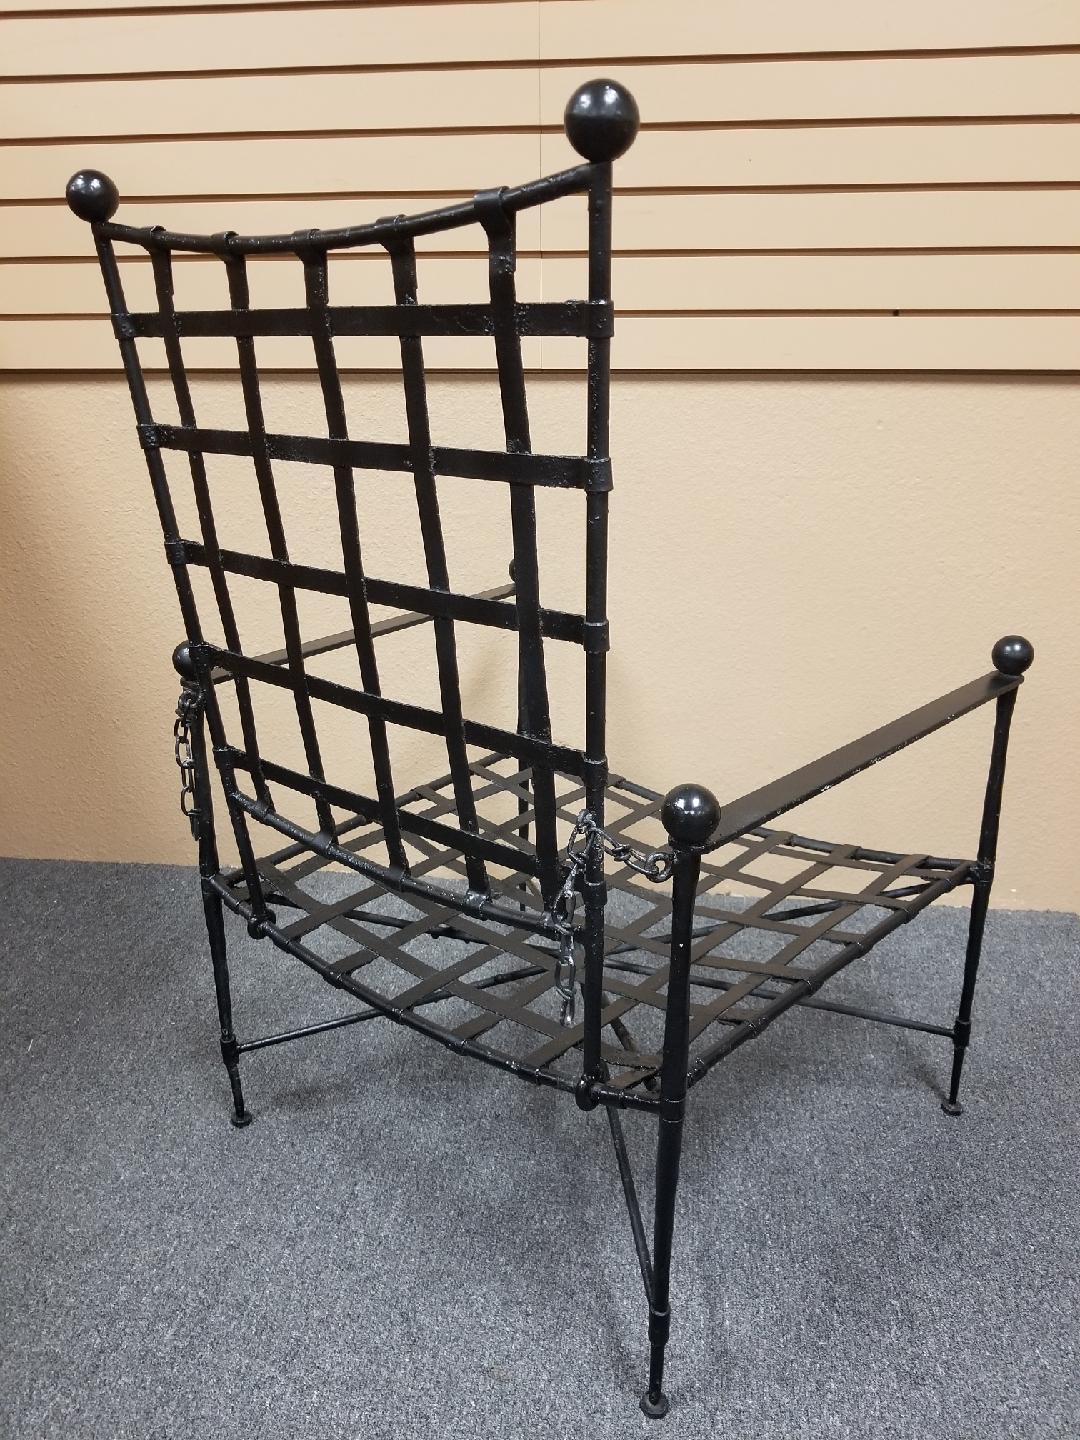 A very nice midcentury wrought iron reclining armchair by Mario Papperzini for John Salterini, circa 1950s. The piece is painted black and has an adjustable back. Arm height is 21